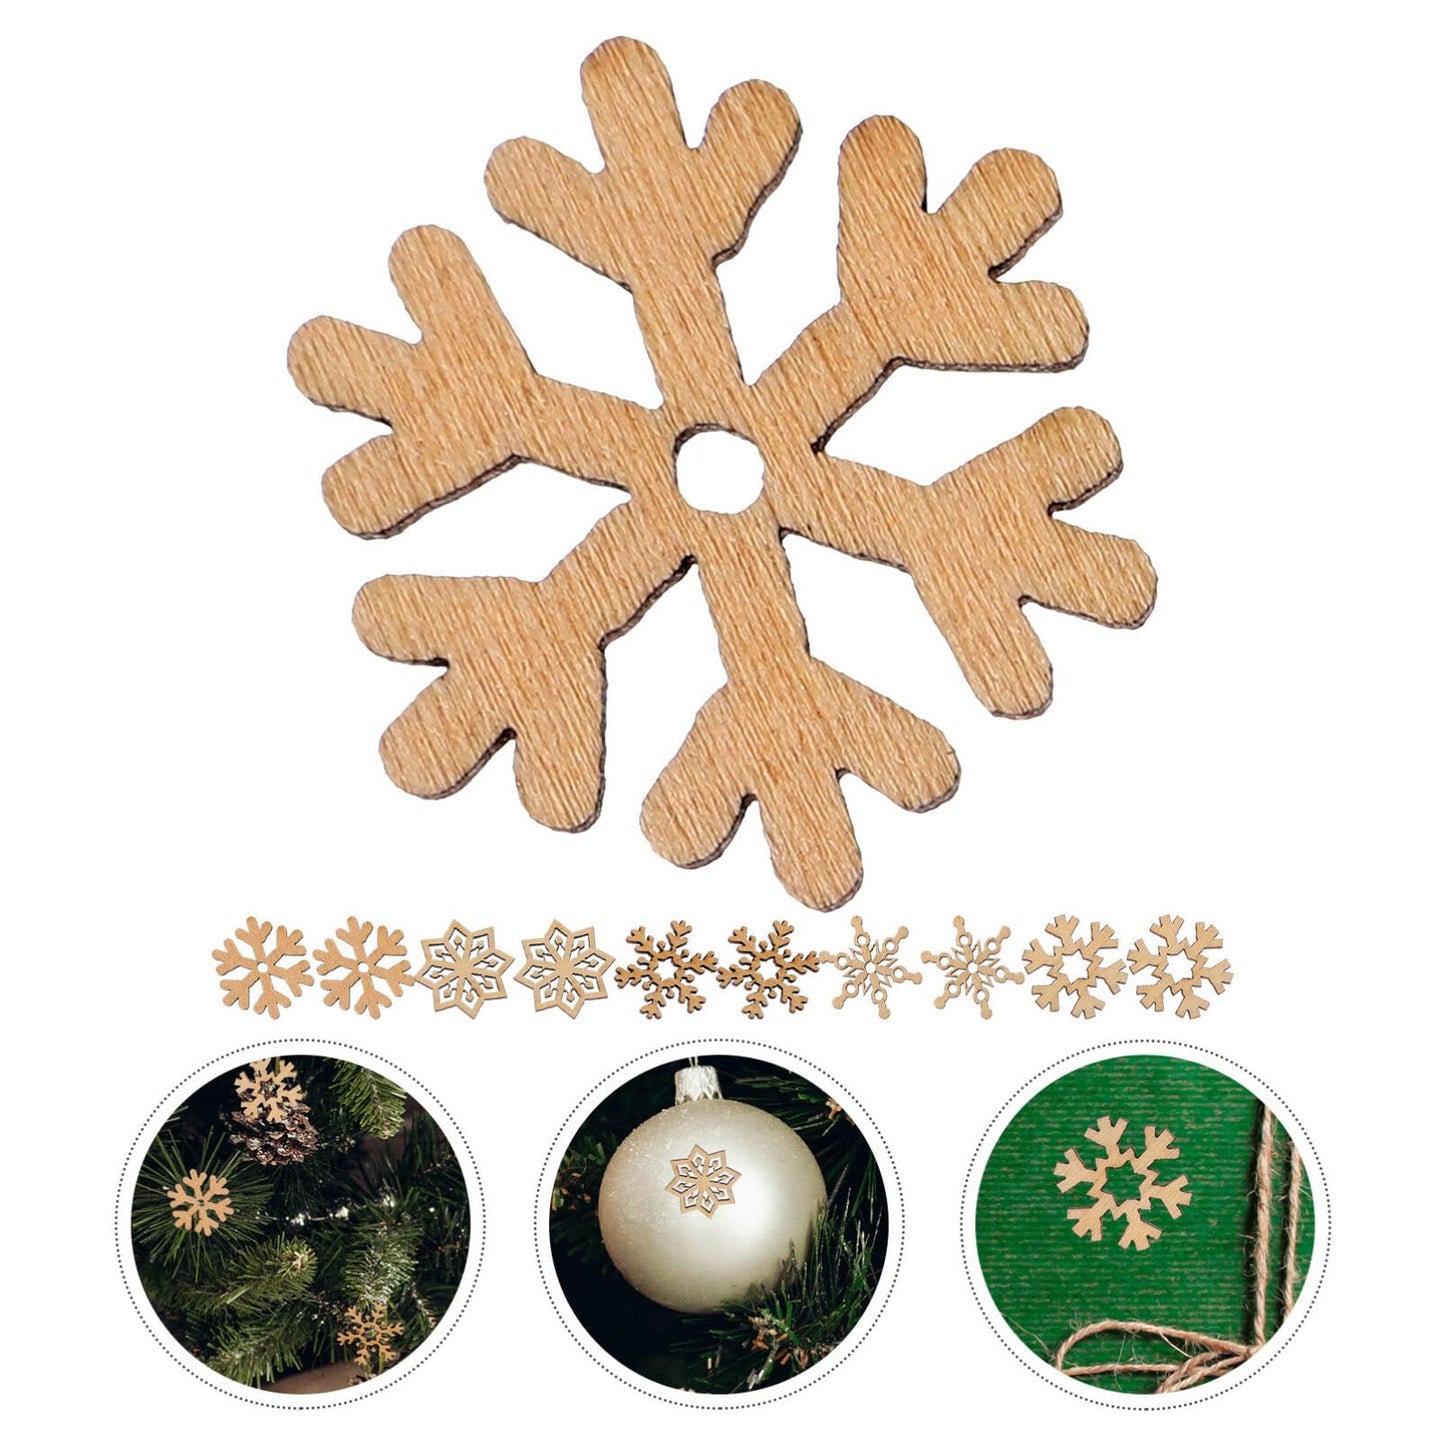 VOSAREA Christmas Unfinished Wooden Snowflake Ornaments: 200pcs Snowflake Hanging Cutouts Blank Wood Slices DIY Craft Embellishments for Xmas Tree